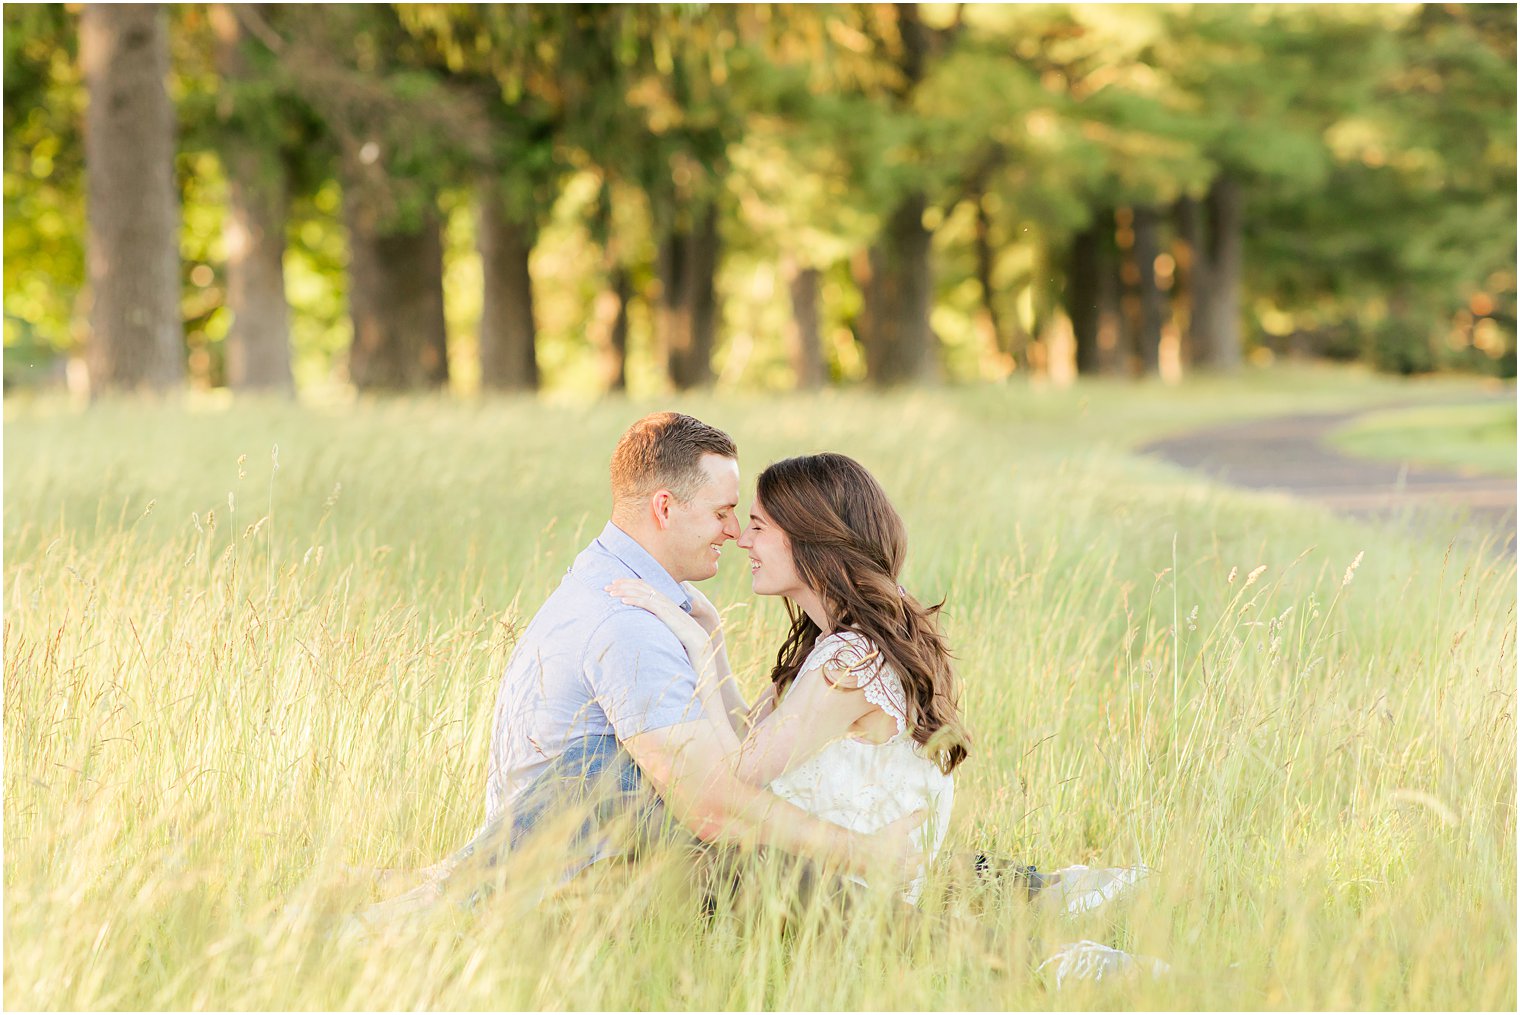 bride and groom sit together laughing in grass during PA engagement photos